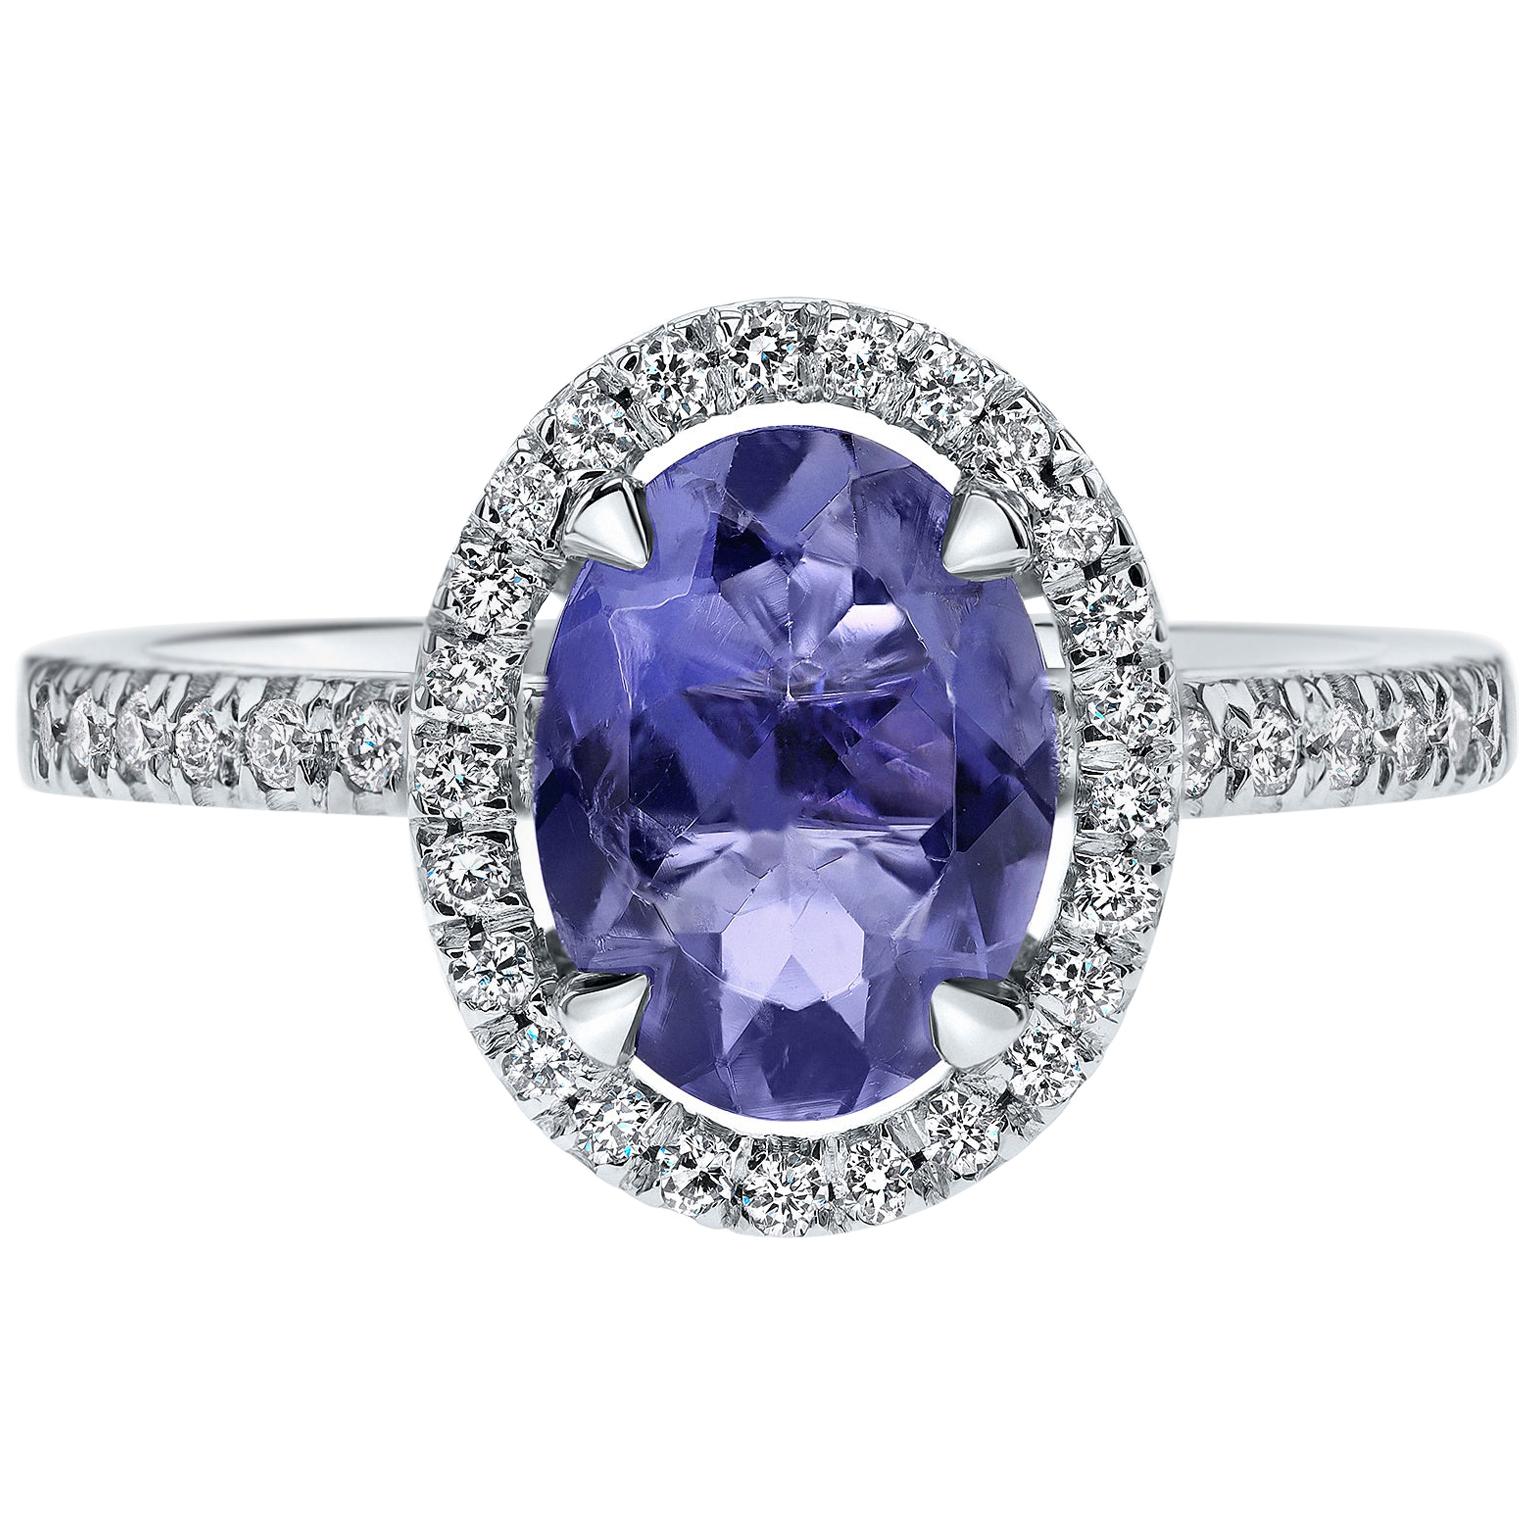 1.56 Carat Oval Tanzanite and Diamonds Halo Ring in White Gold - Shlomit Rogel For Sale